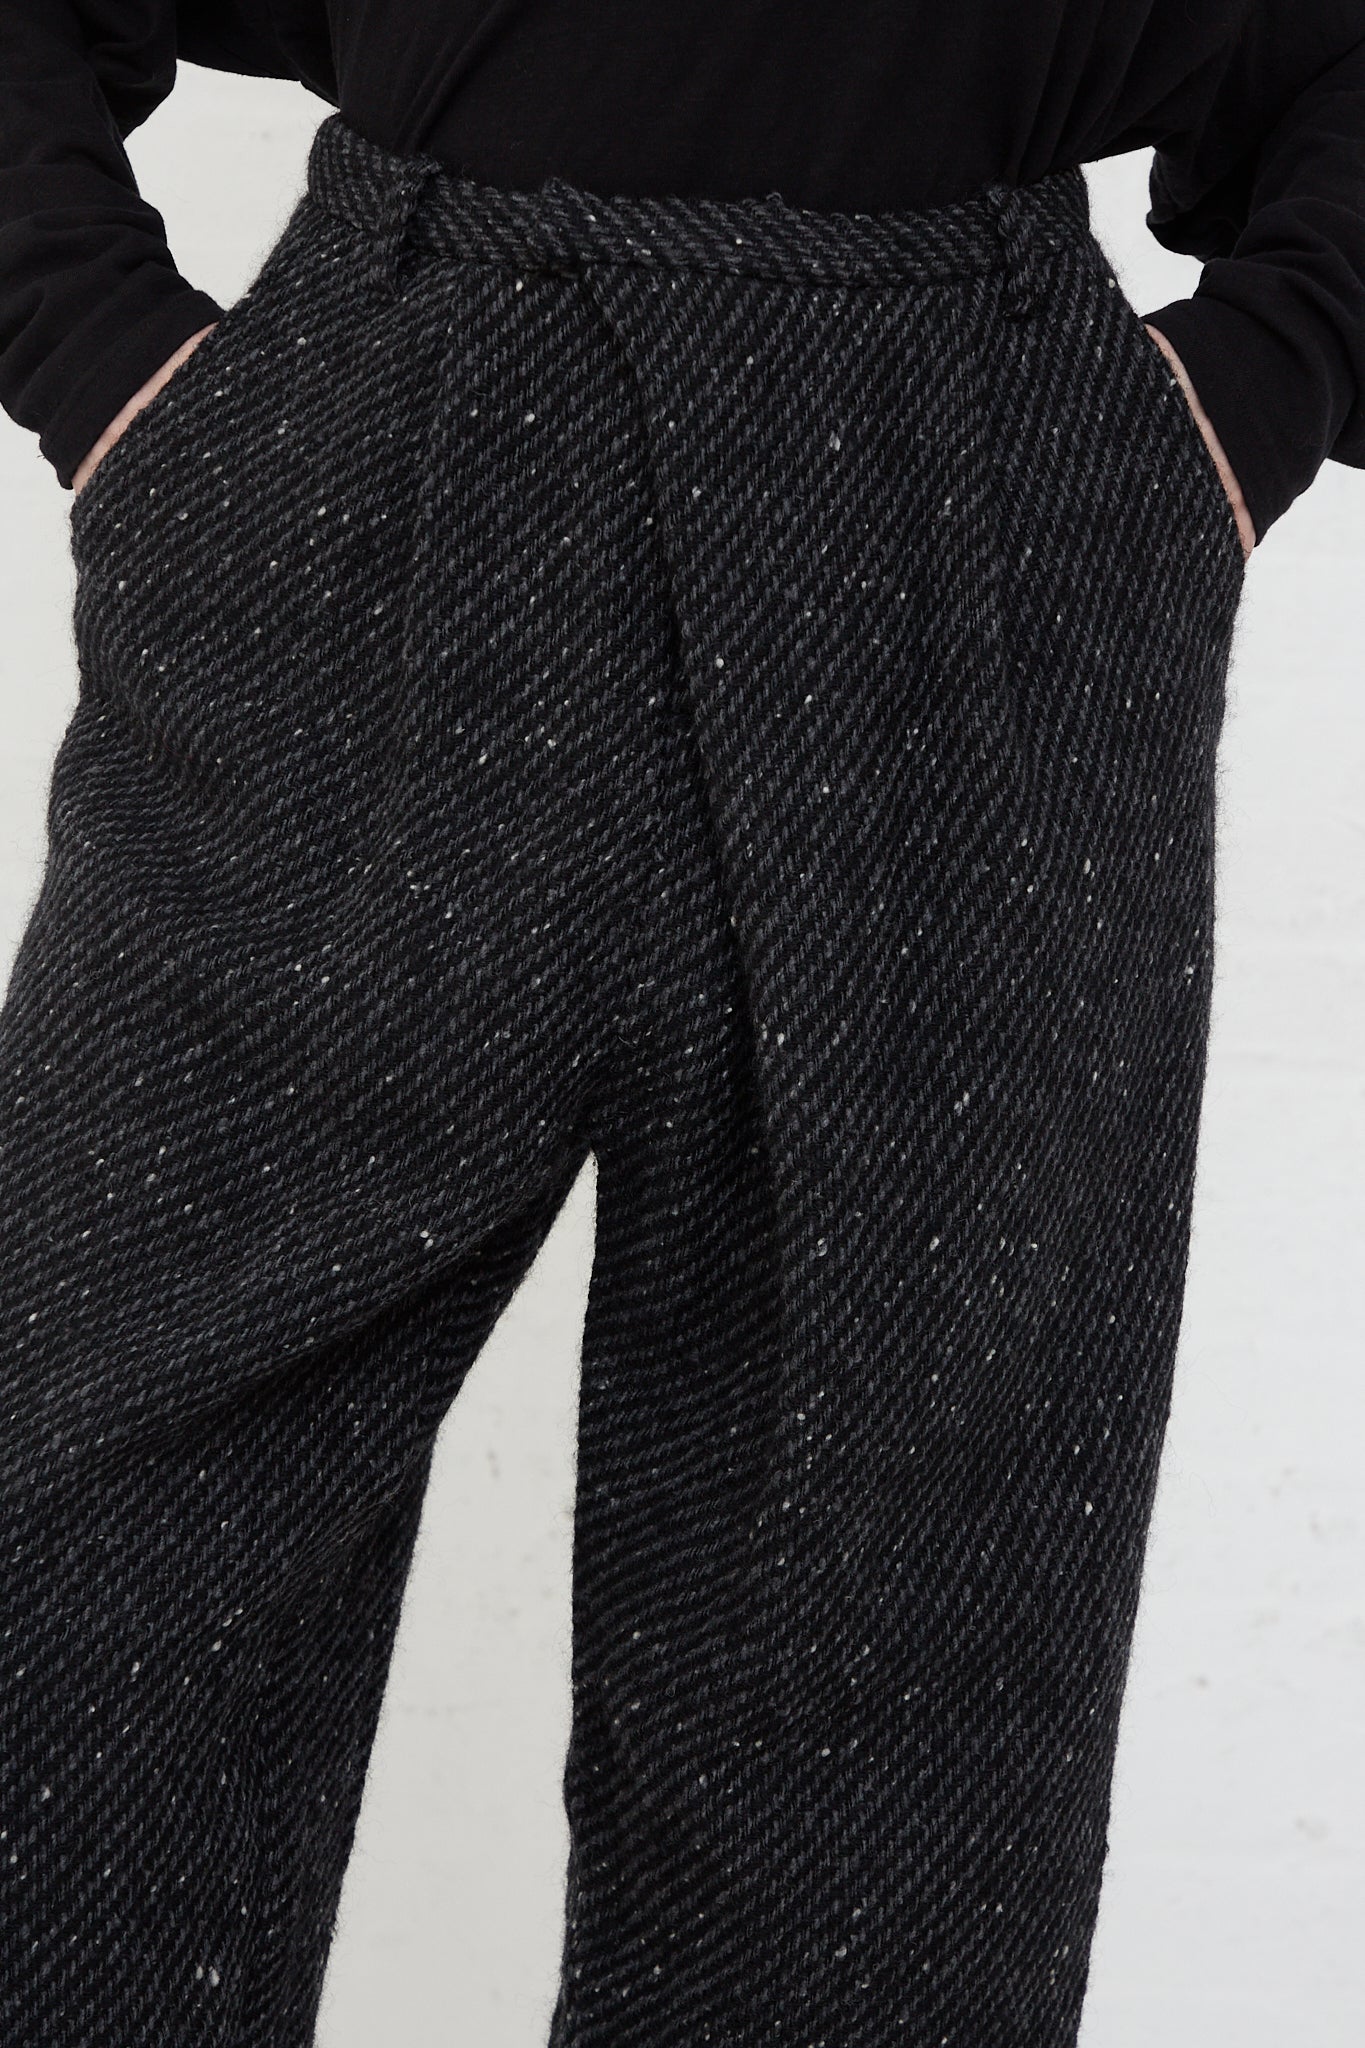 A woman wearing Ichi Antiquités' Snow Nep Wool Pant in Black, and a black shirt.